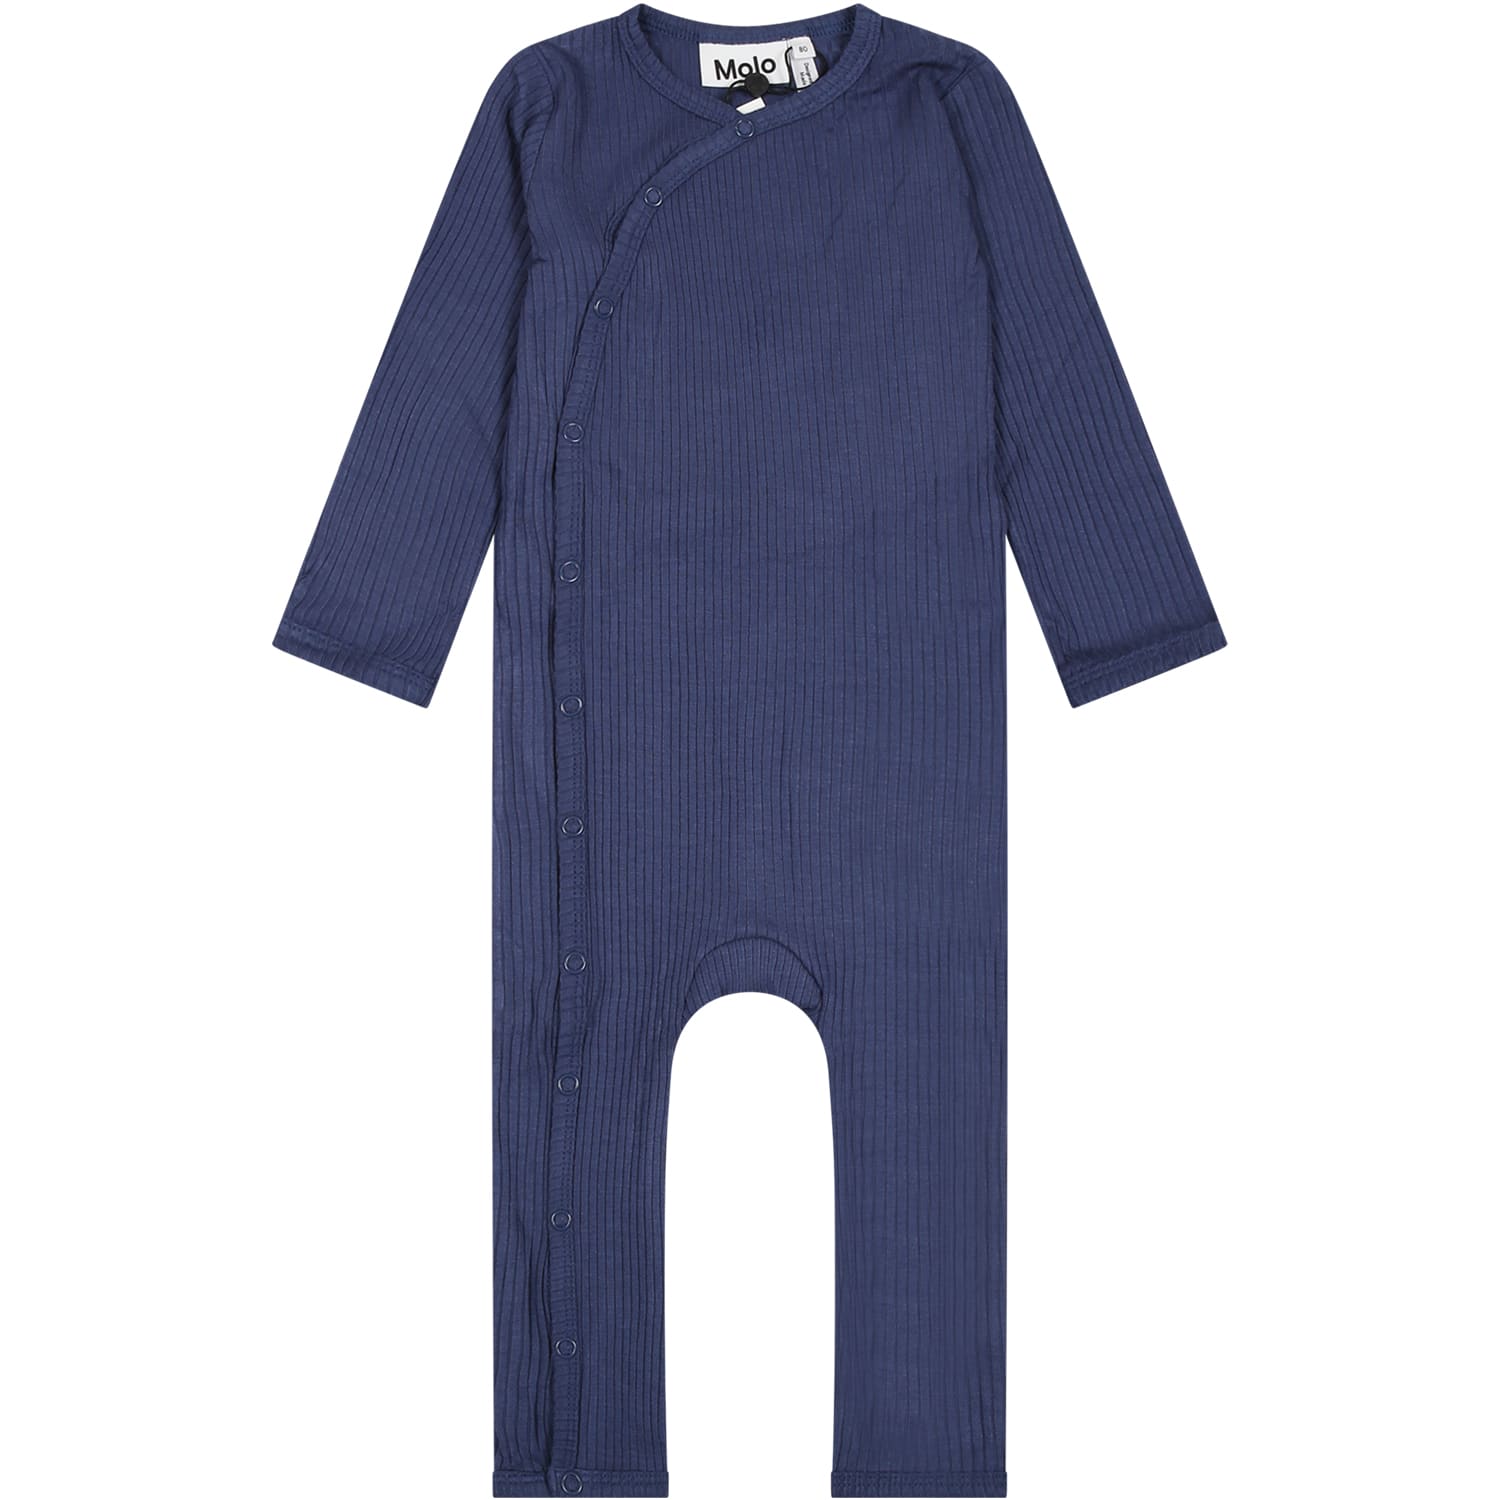 MOLO BLUE BABYGROW FOR BABY KIDS